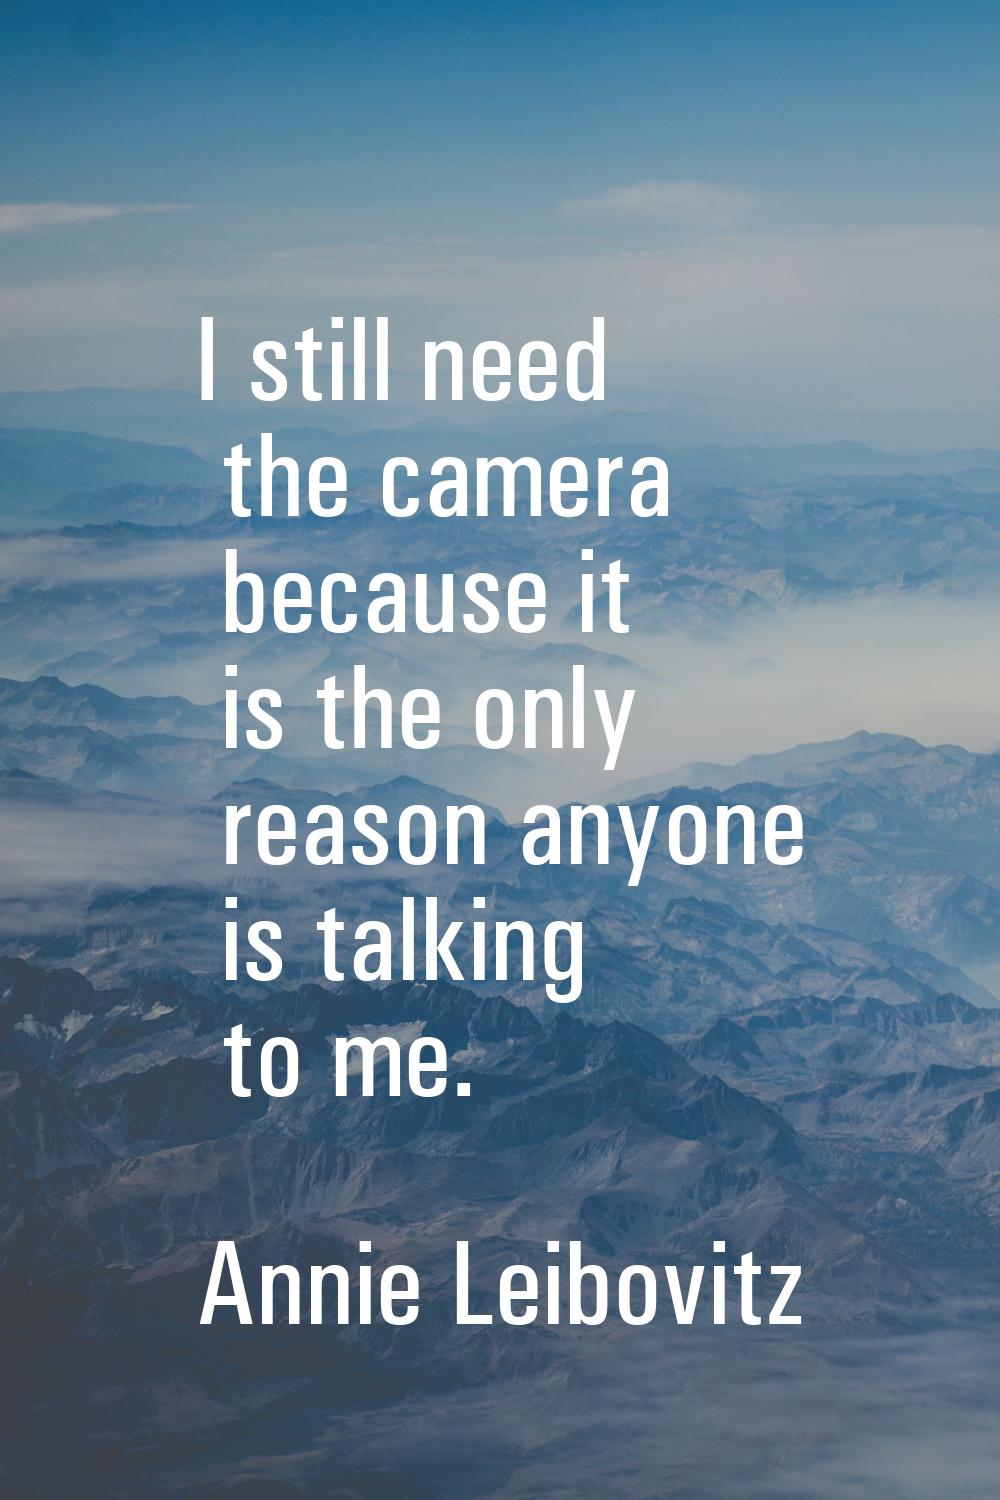 I still need the camera because it is the only reason anyone is talking to me.